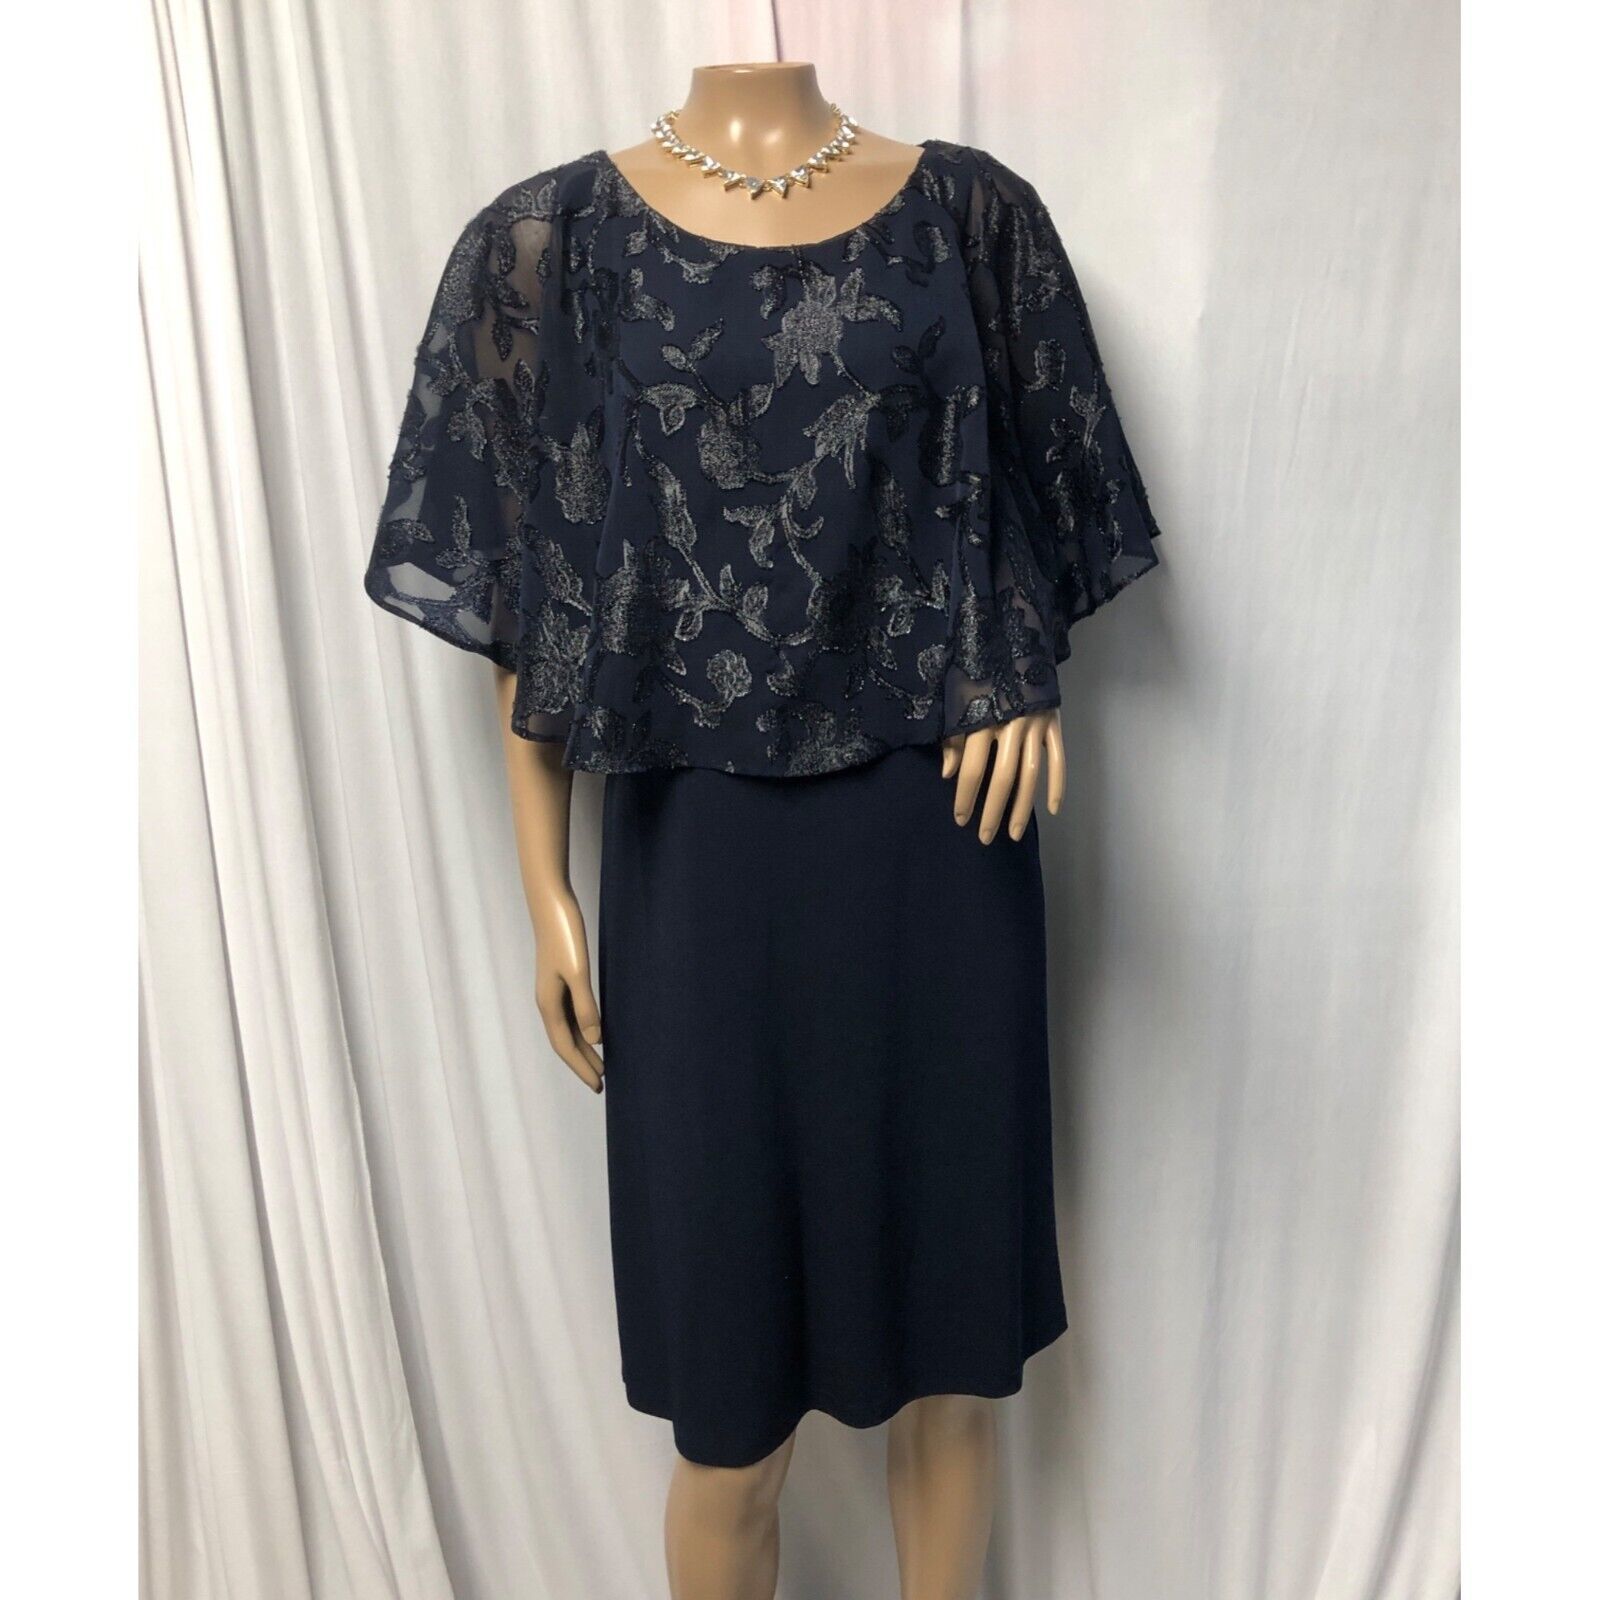 Primary image for Connected Apparel Dress Womens 6 Navy Chiffon Cape-Overlay Sheath